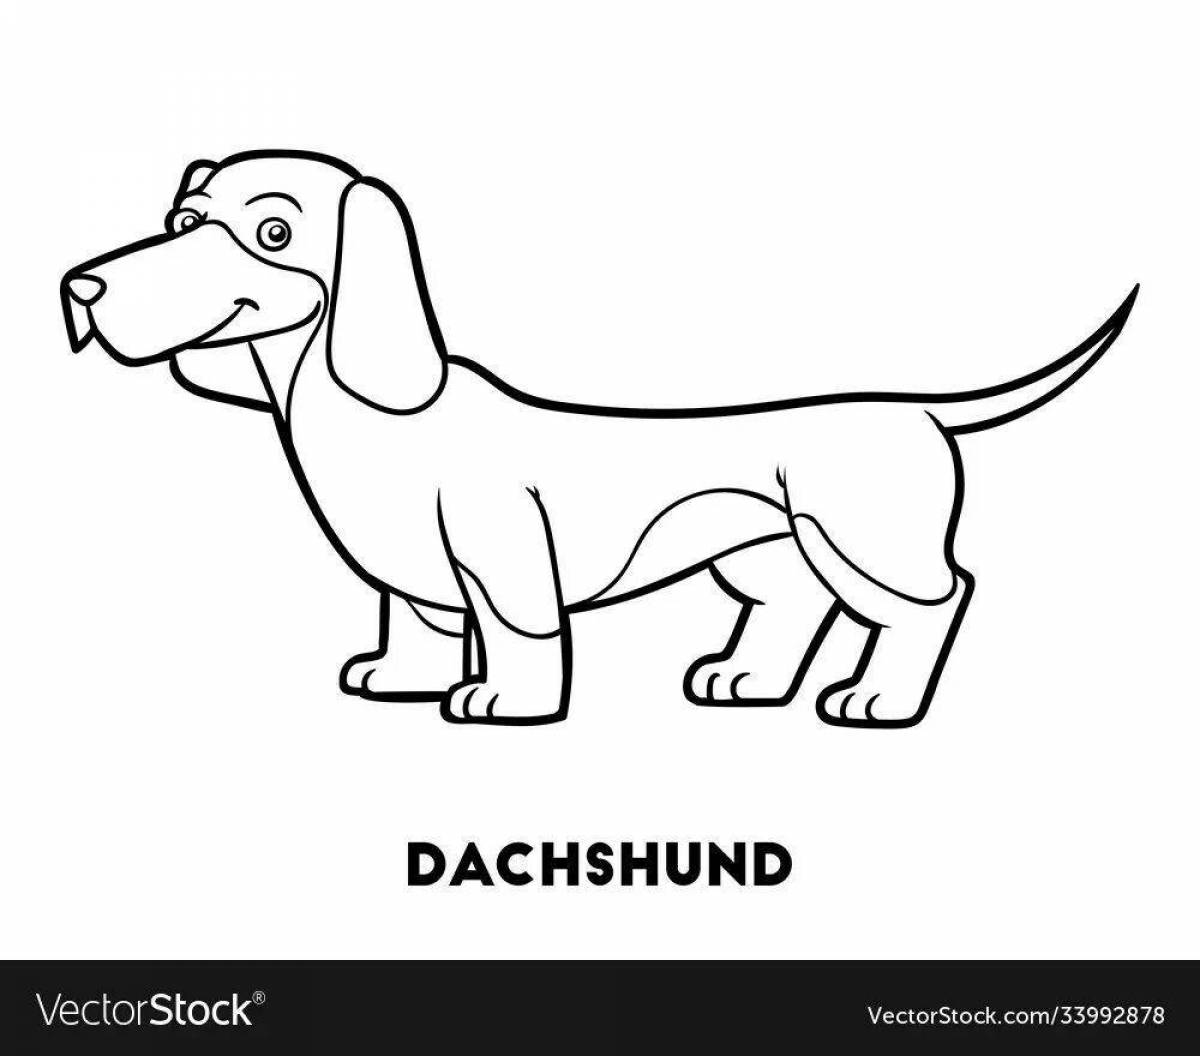 Coloring book brave dachshund